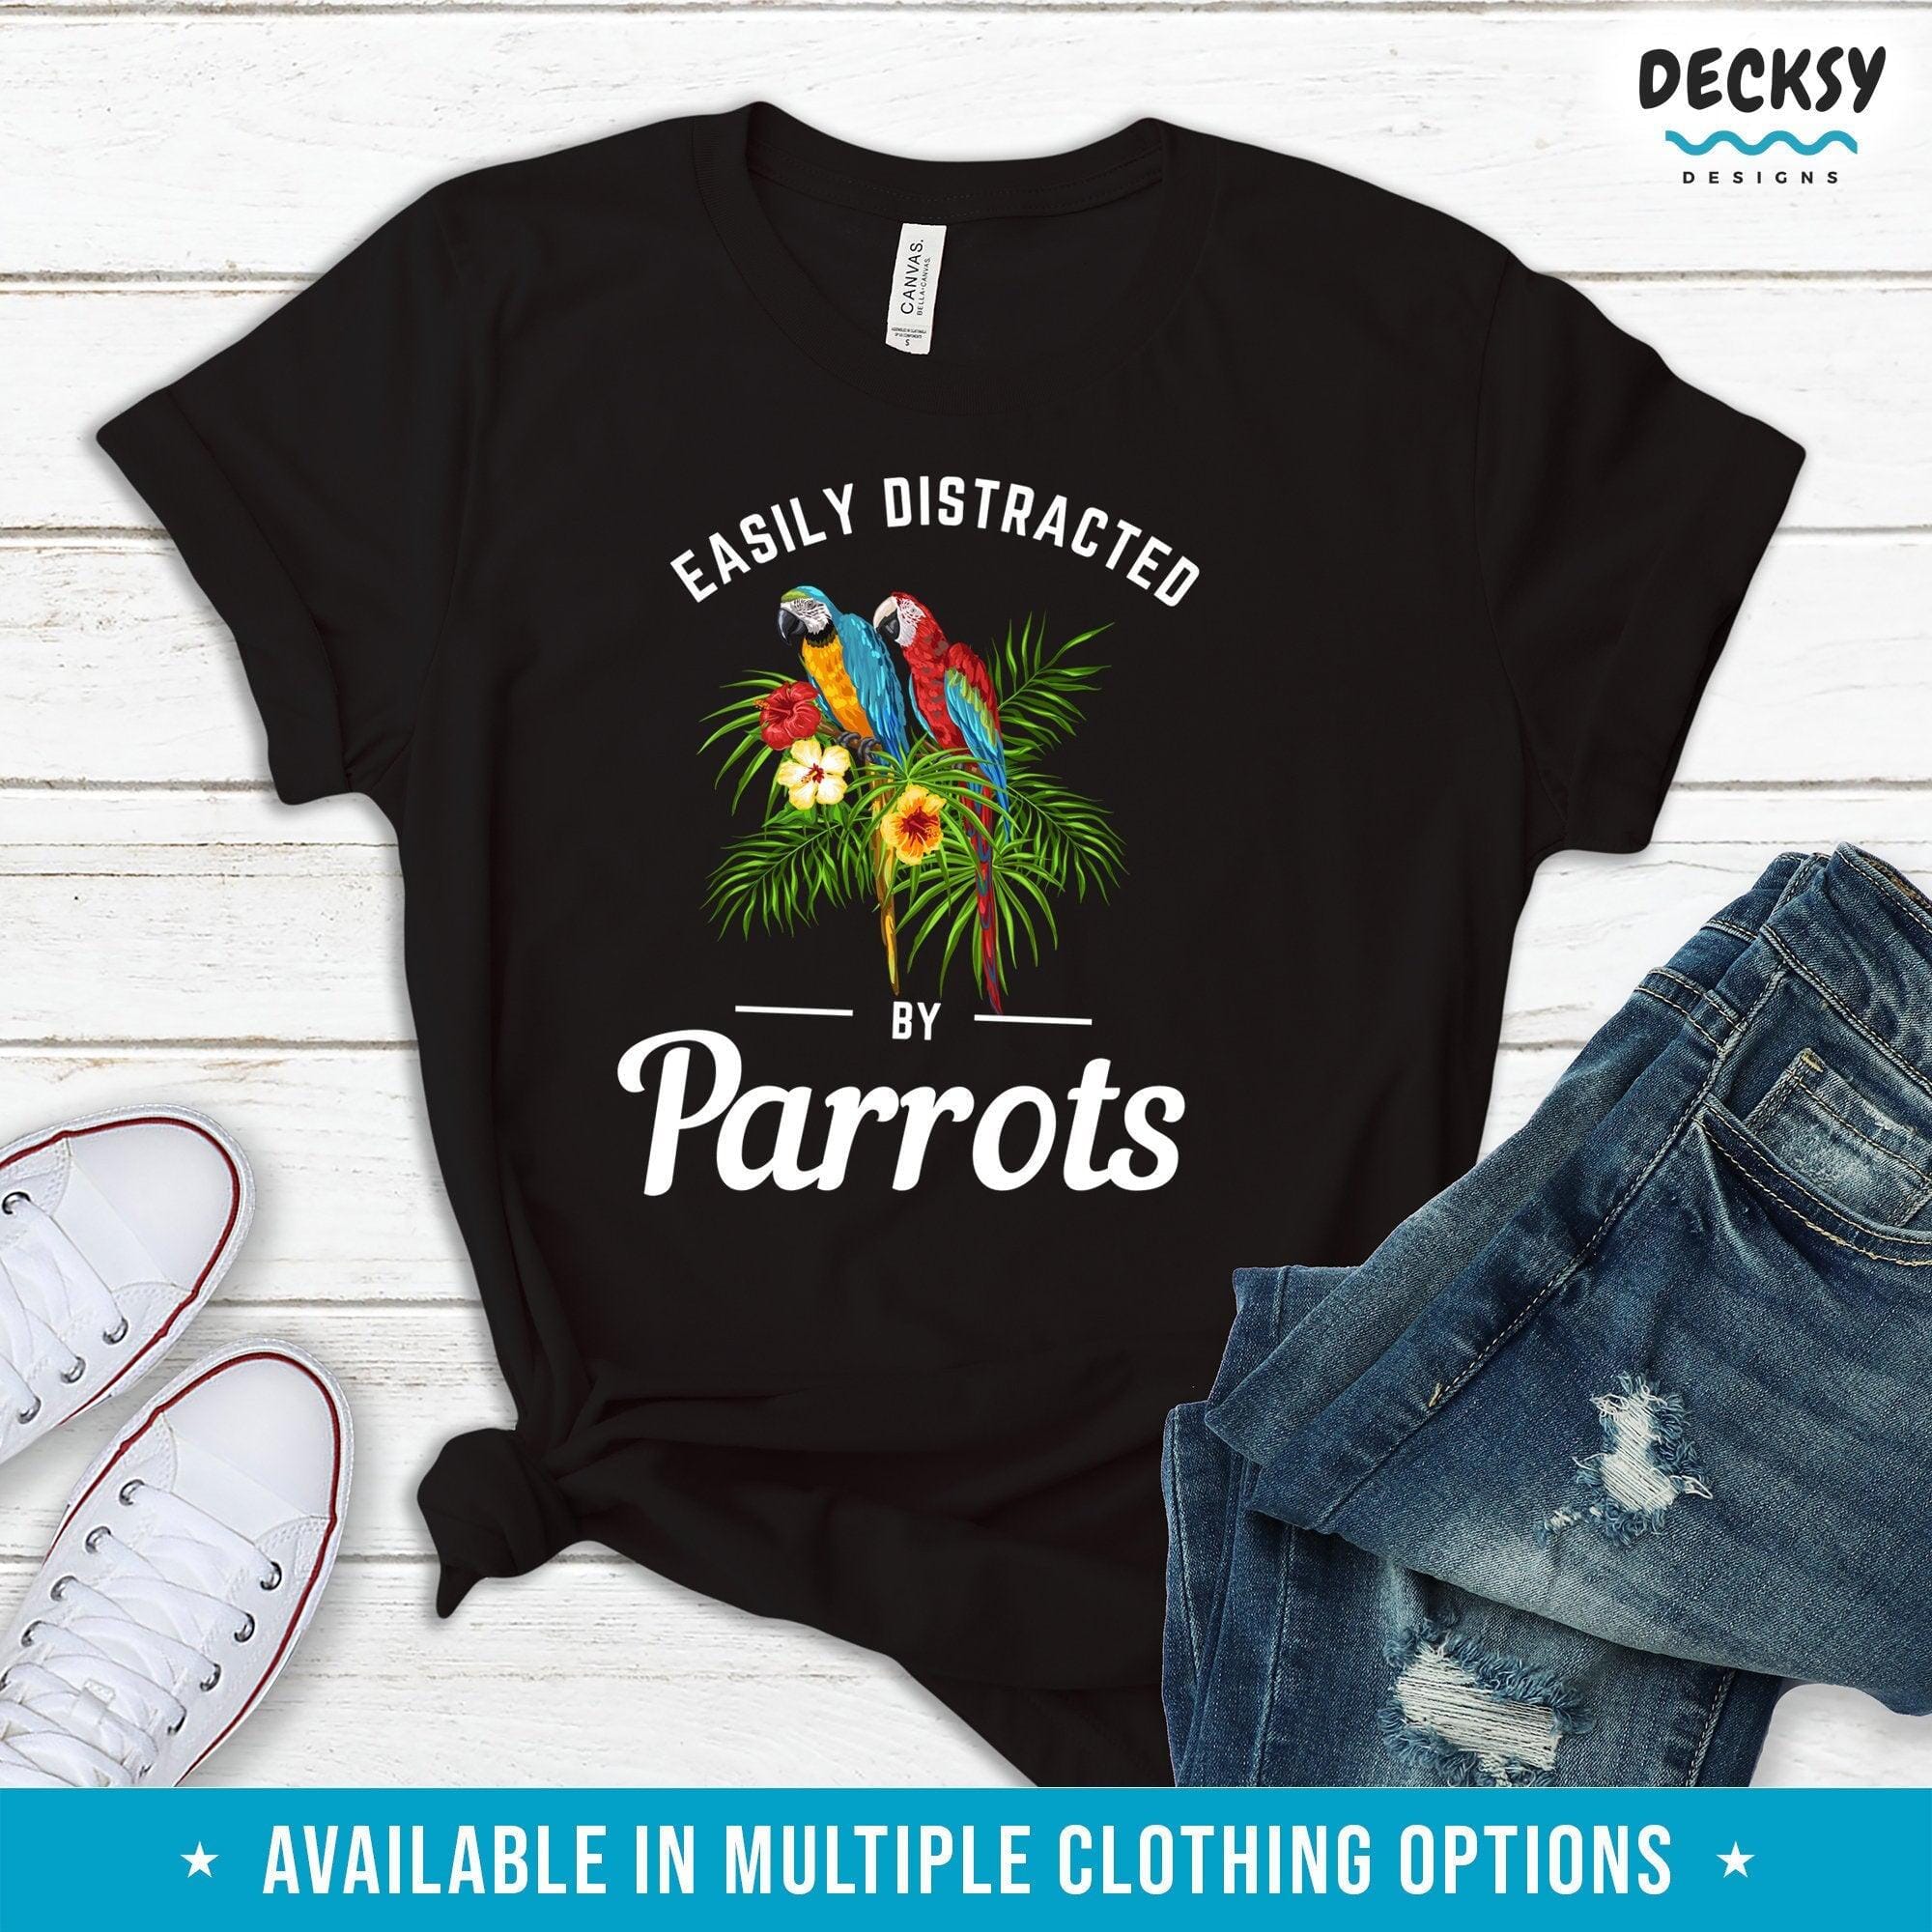 Parrot Lover Shirt, Bird Gift-Clothing:Gender-Neutral Adult Clothing:Tops & Tees:T-shirts:Graphic Tees-DecksyDesigns